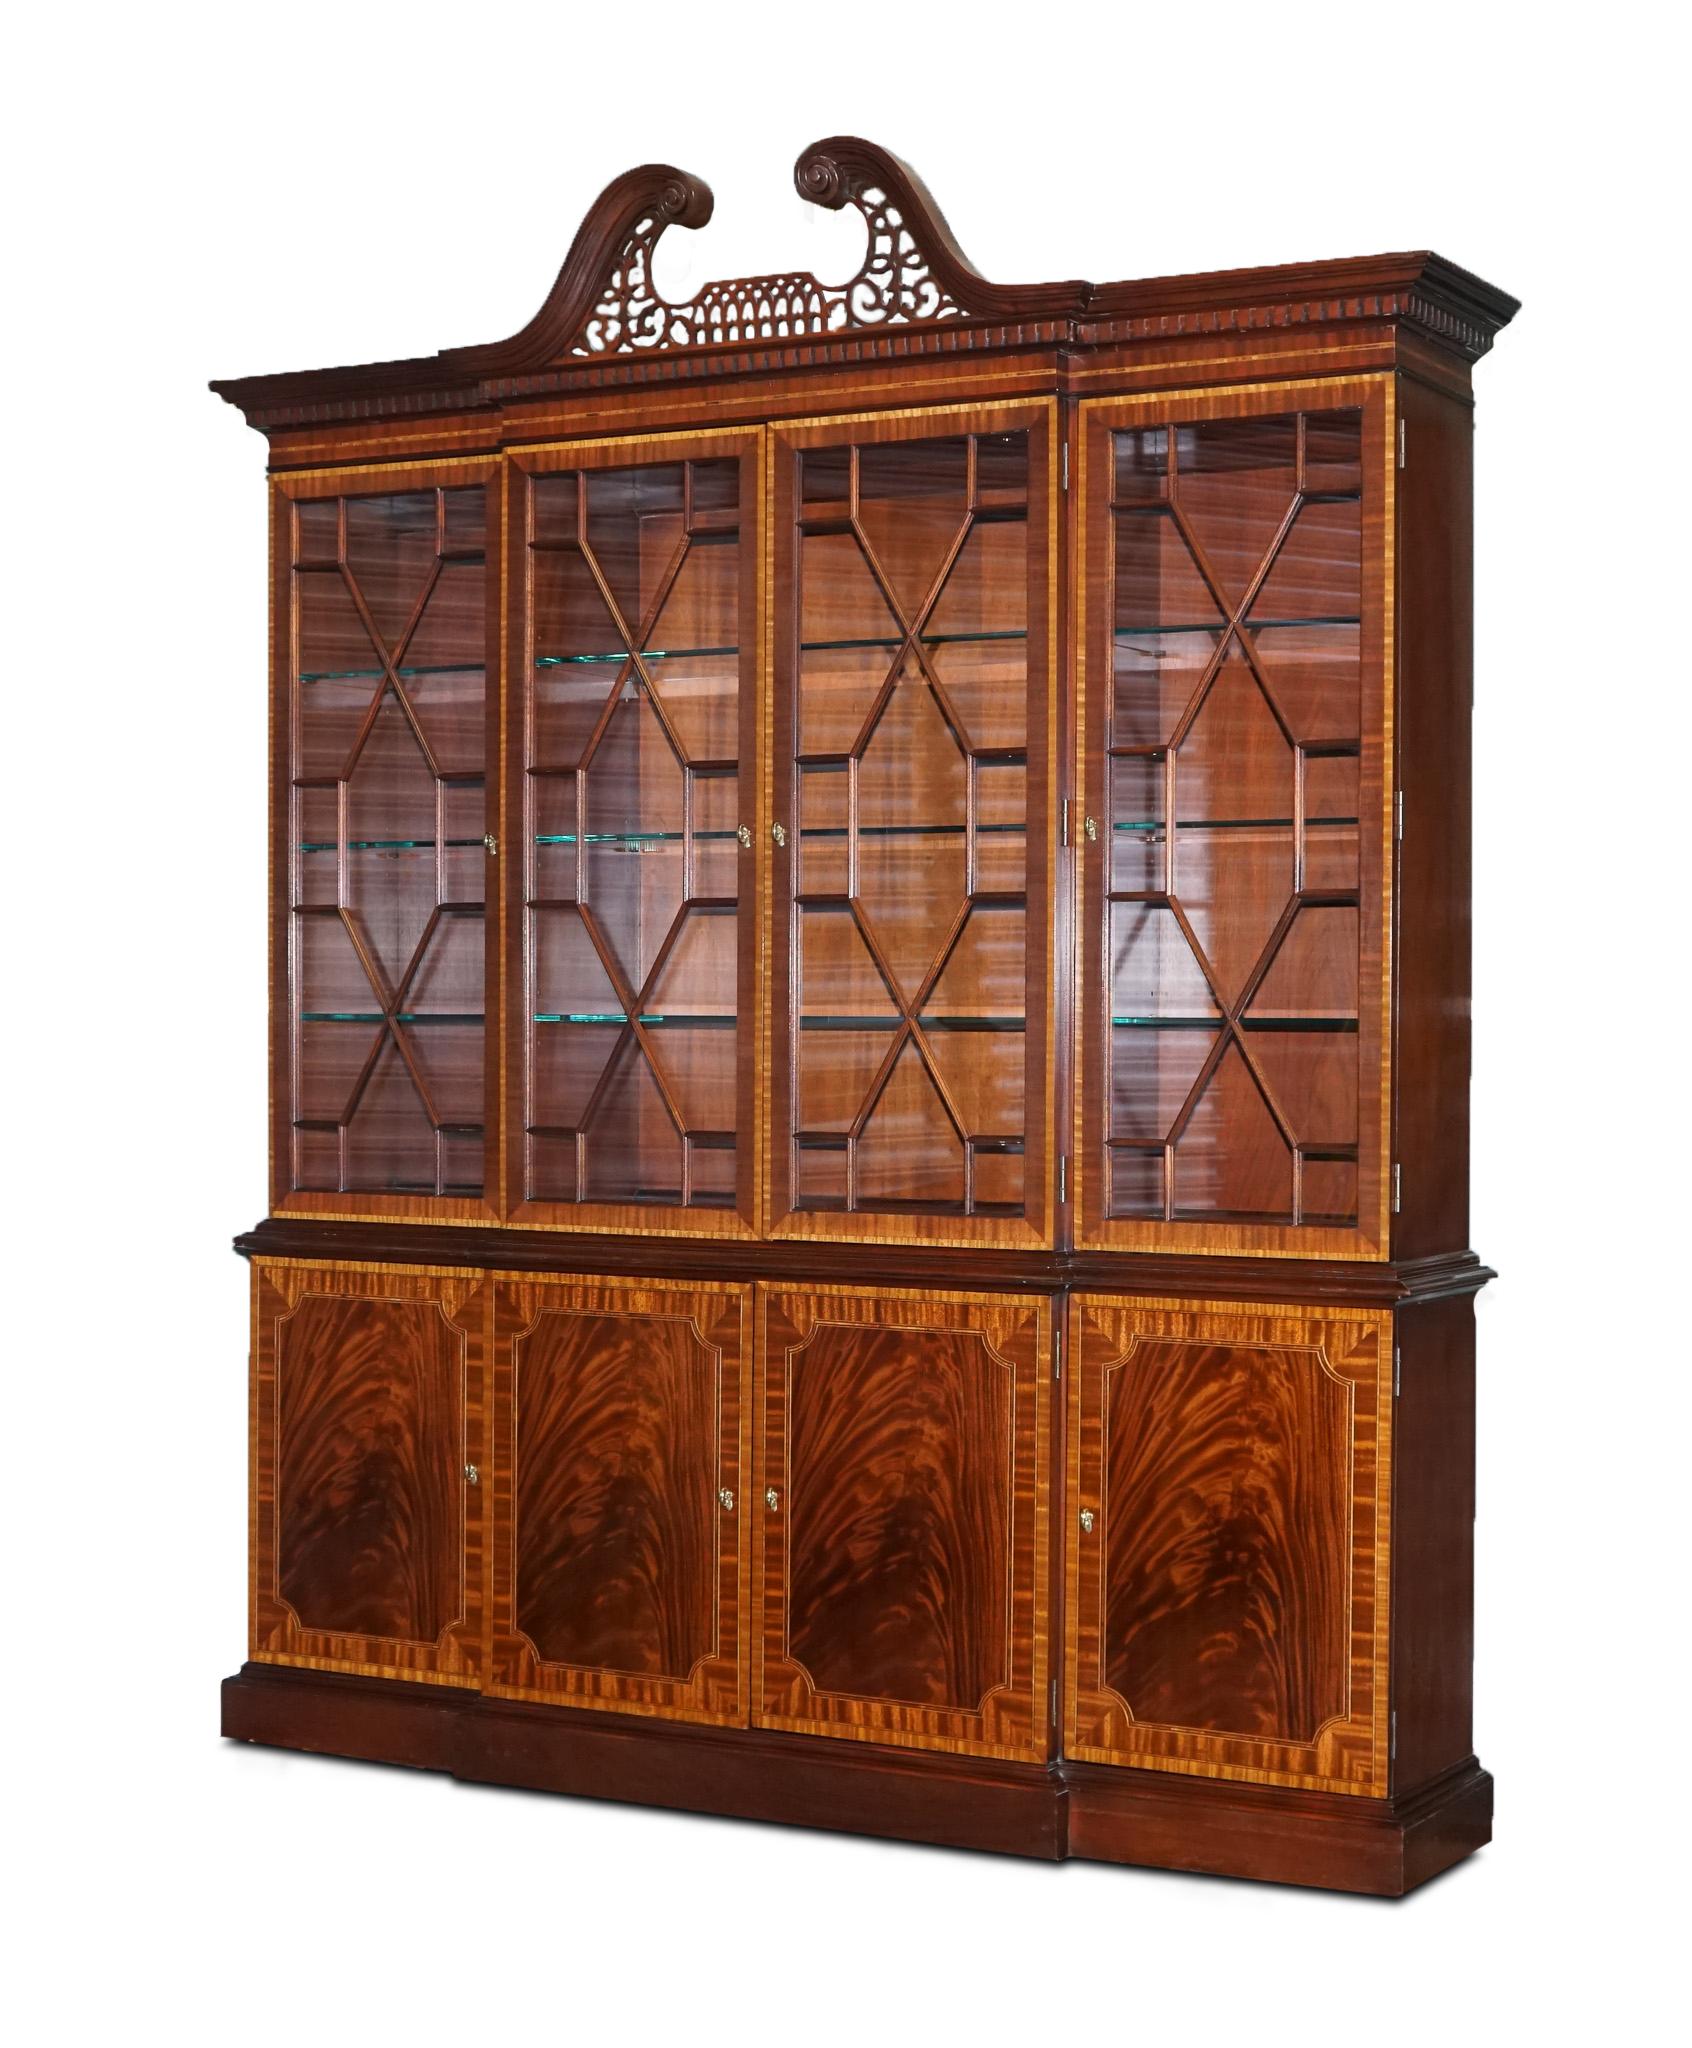 We are excited to offer for sale this large Georgian-style mahogany breakfront bookcase Councill furniture. 

It has four glass doors with wood mullions framed with ribbon stripe mahogany and satinwood banding.

All glass shelves are adjustable